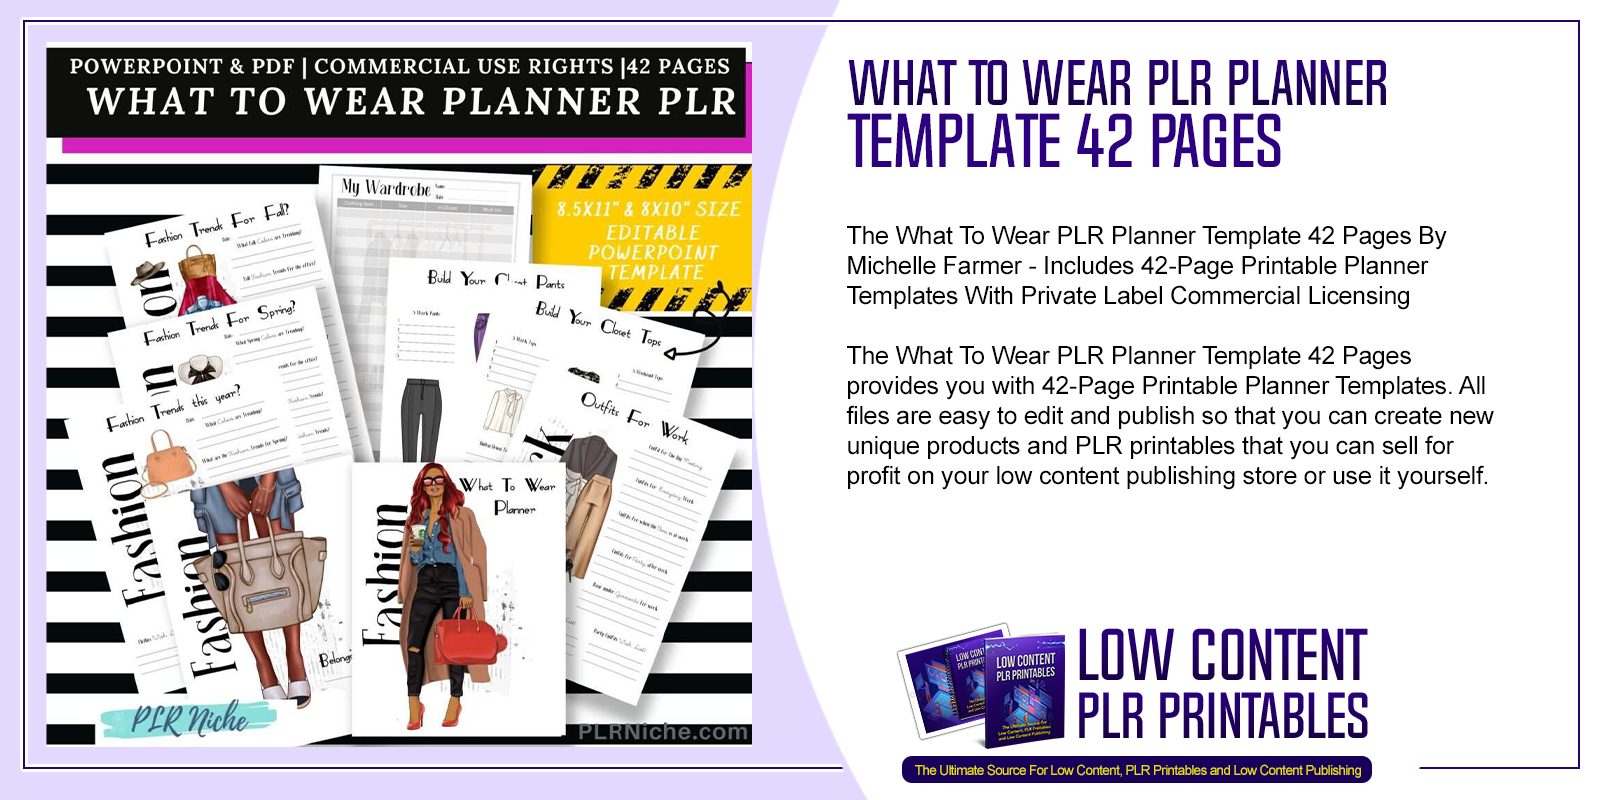 What To Wear PLR Planner Template 42 Pages